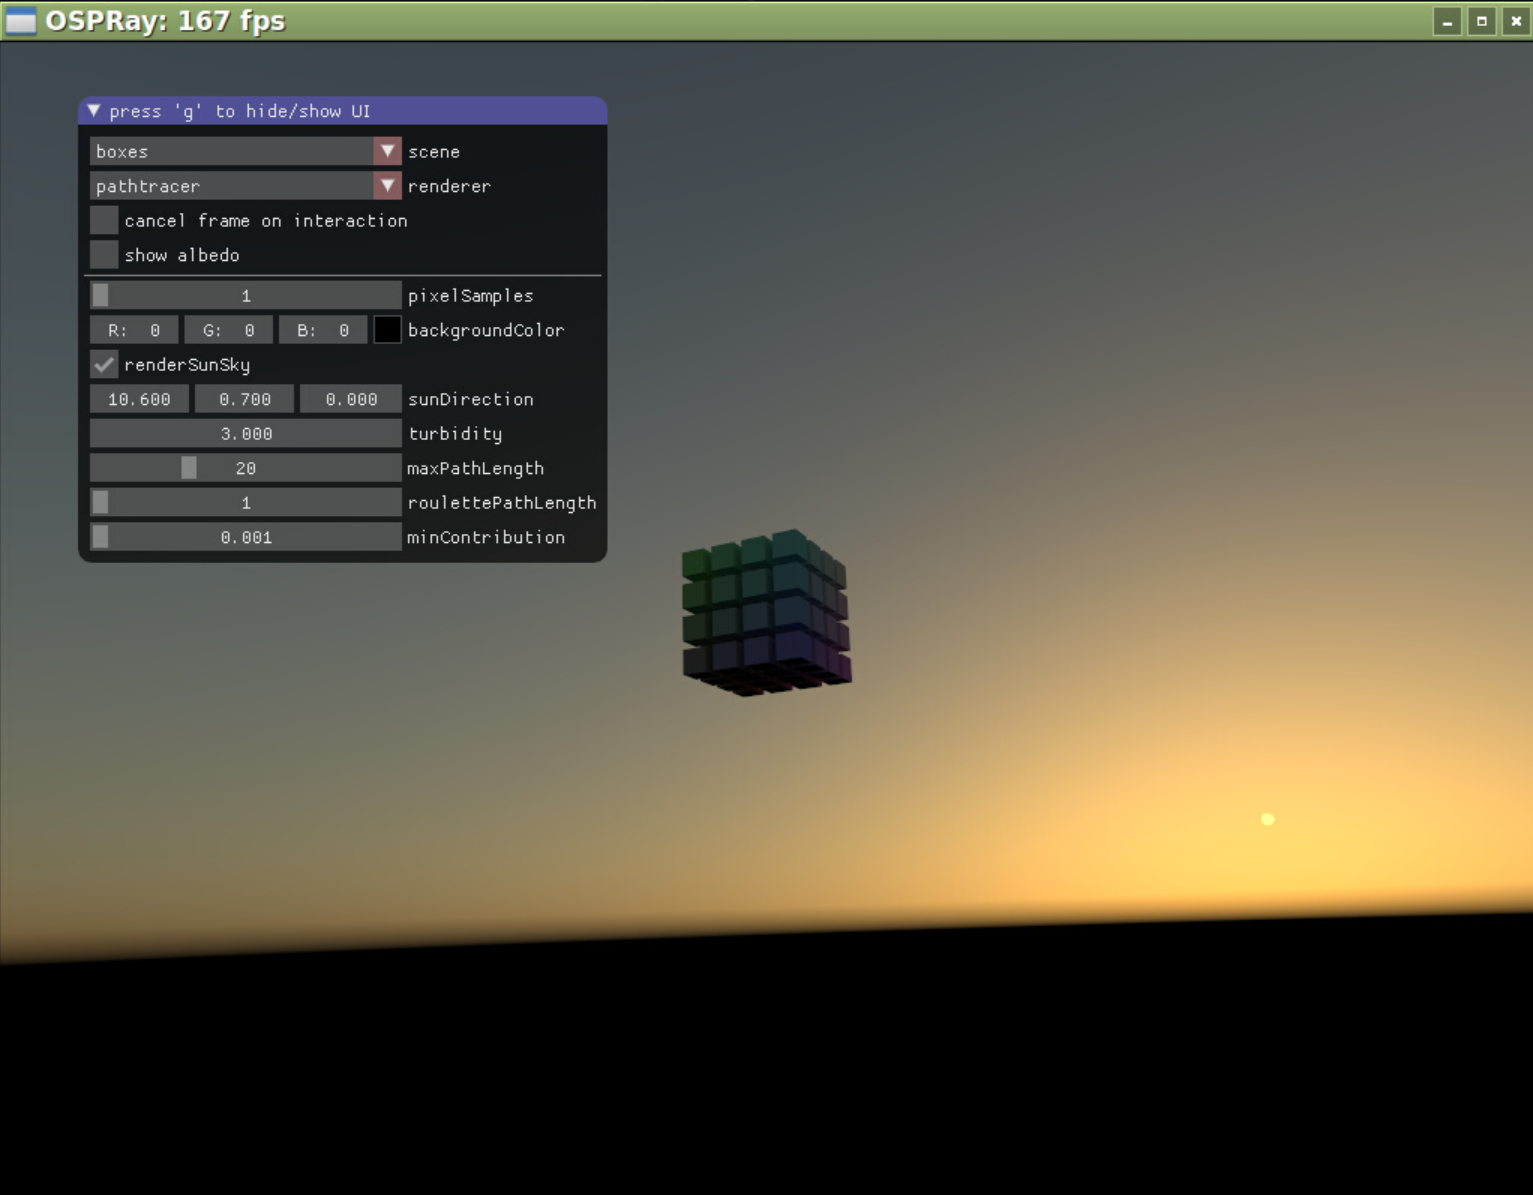 Rendering an evening sky with the renderSunSky option.